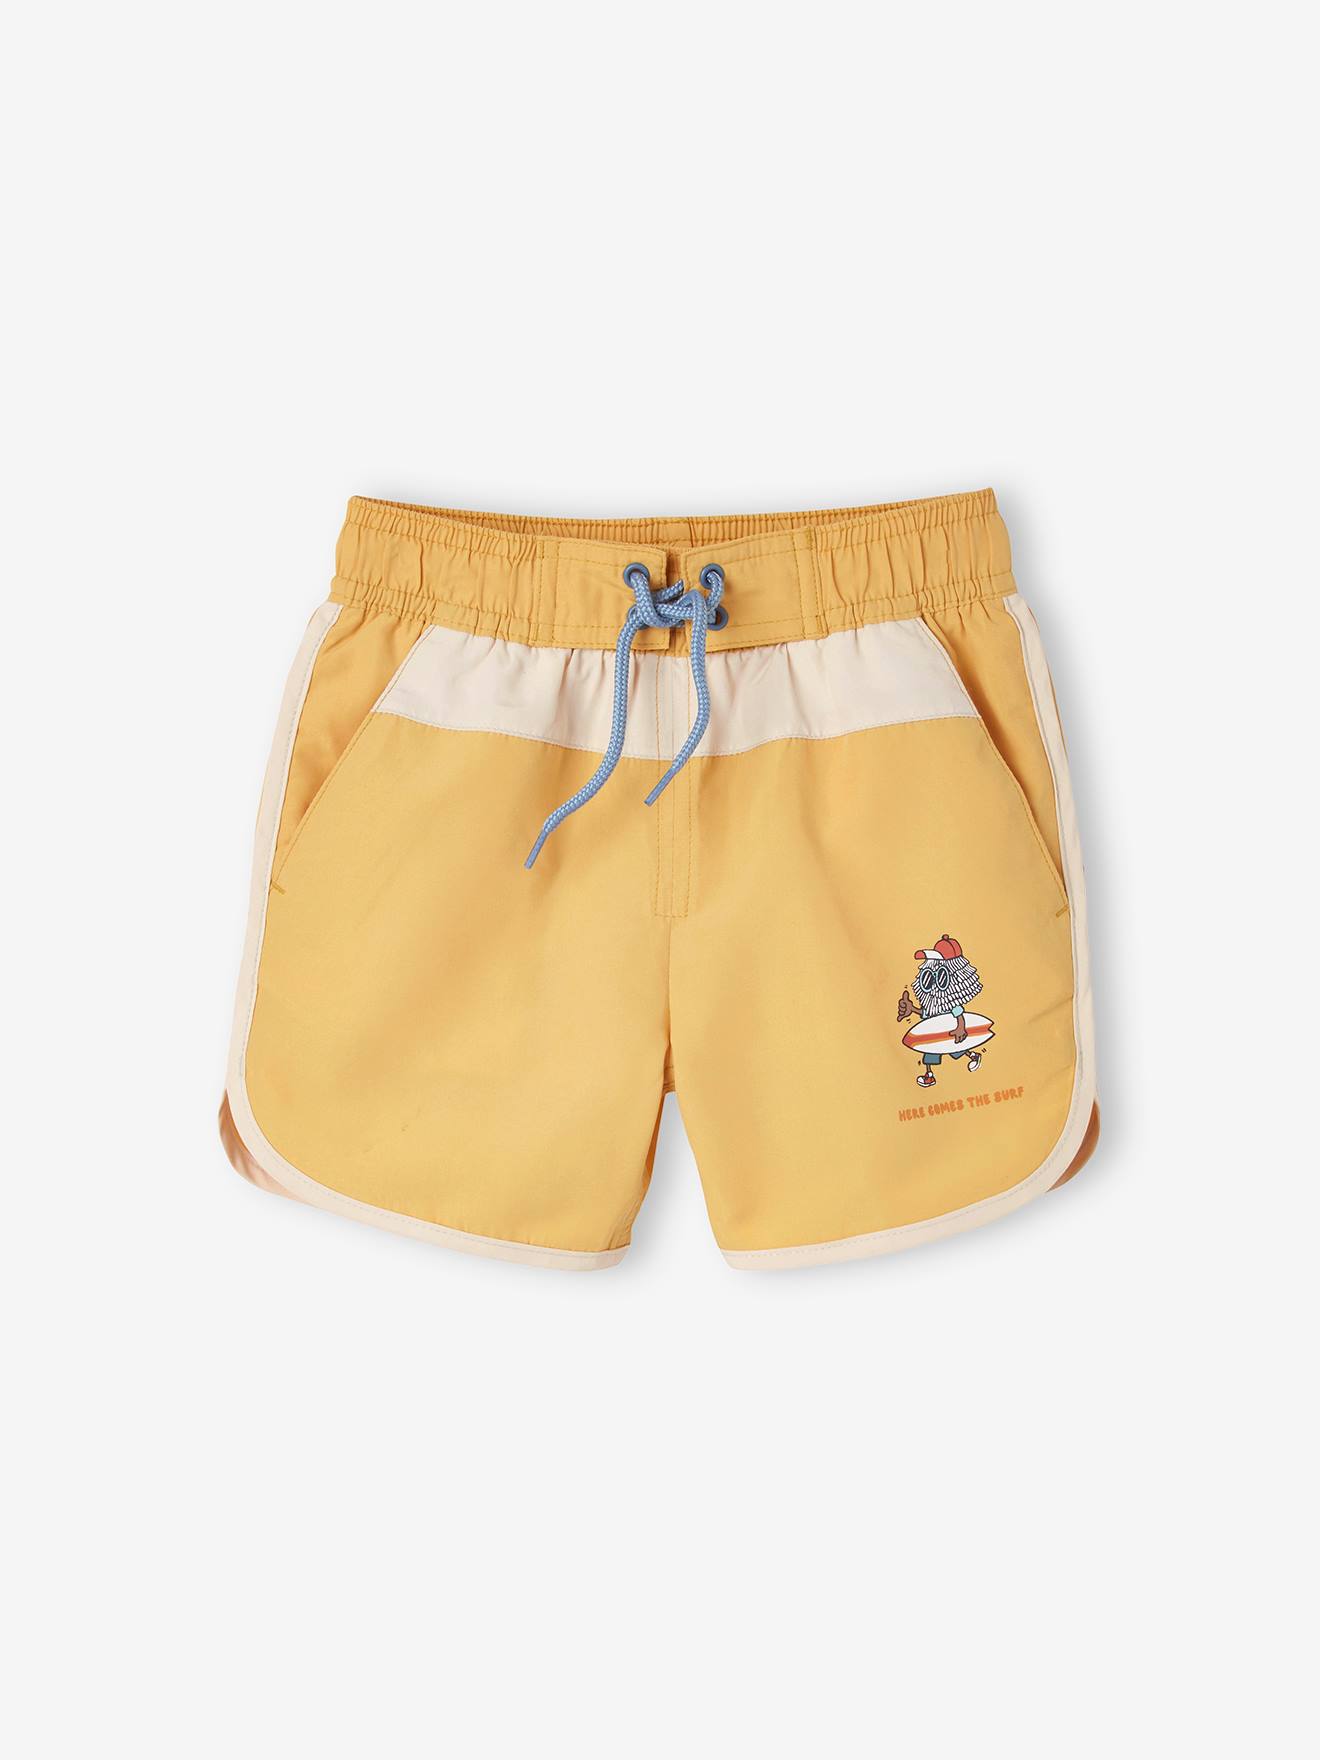 Two-Tone Swim Shorts with Surfing Print for Boys yellow light solid